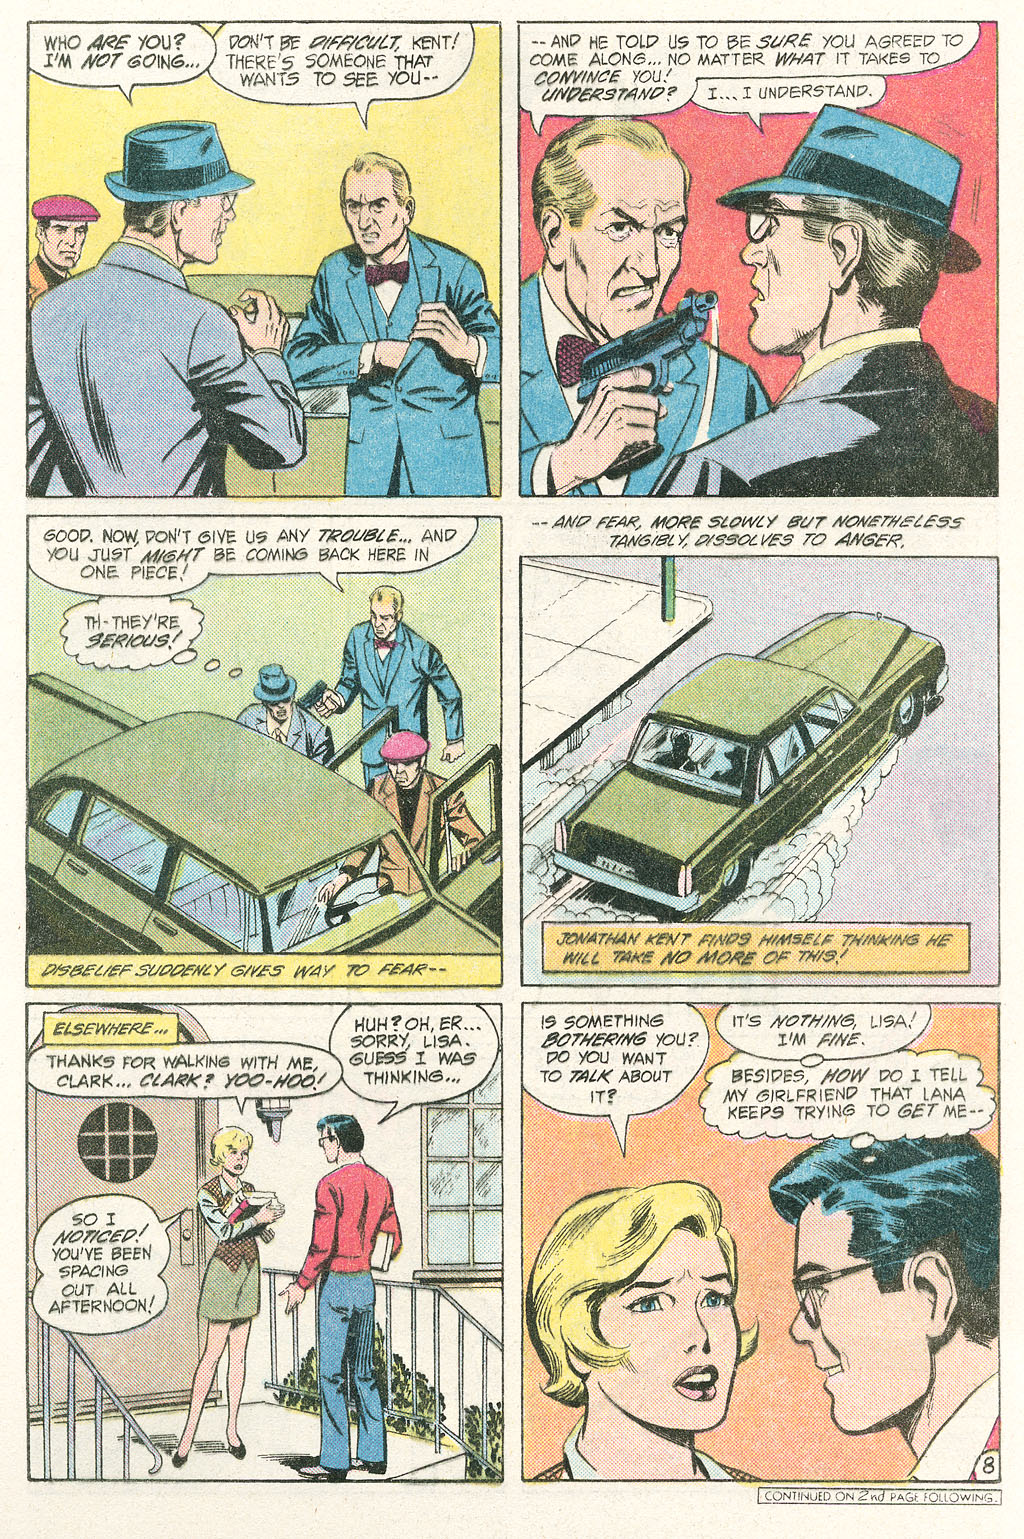 The New Adventures of Superboy 54 Page 11